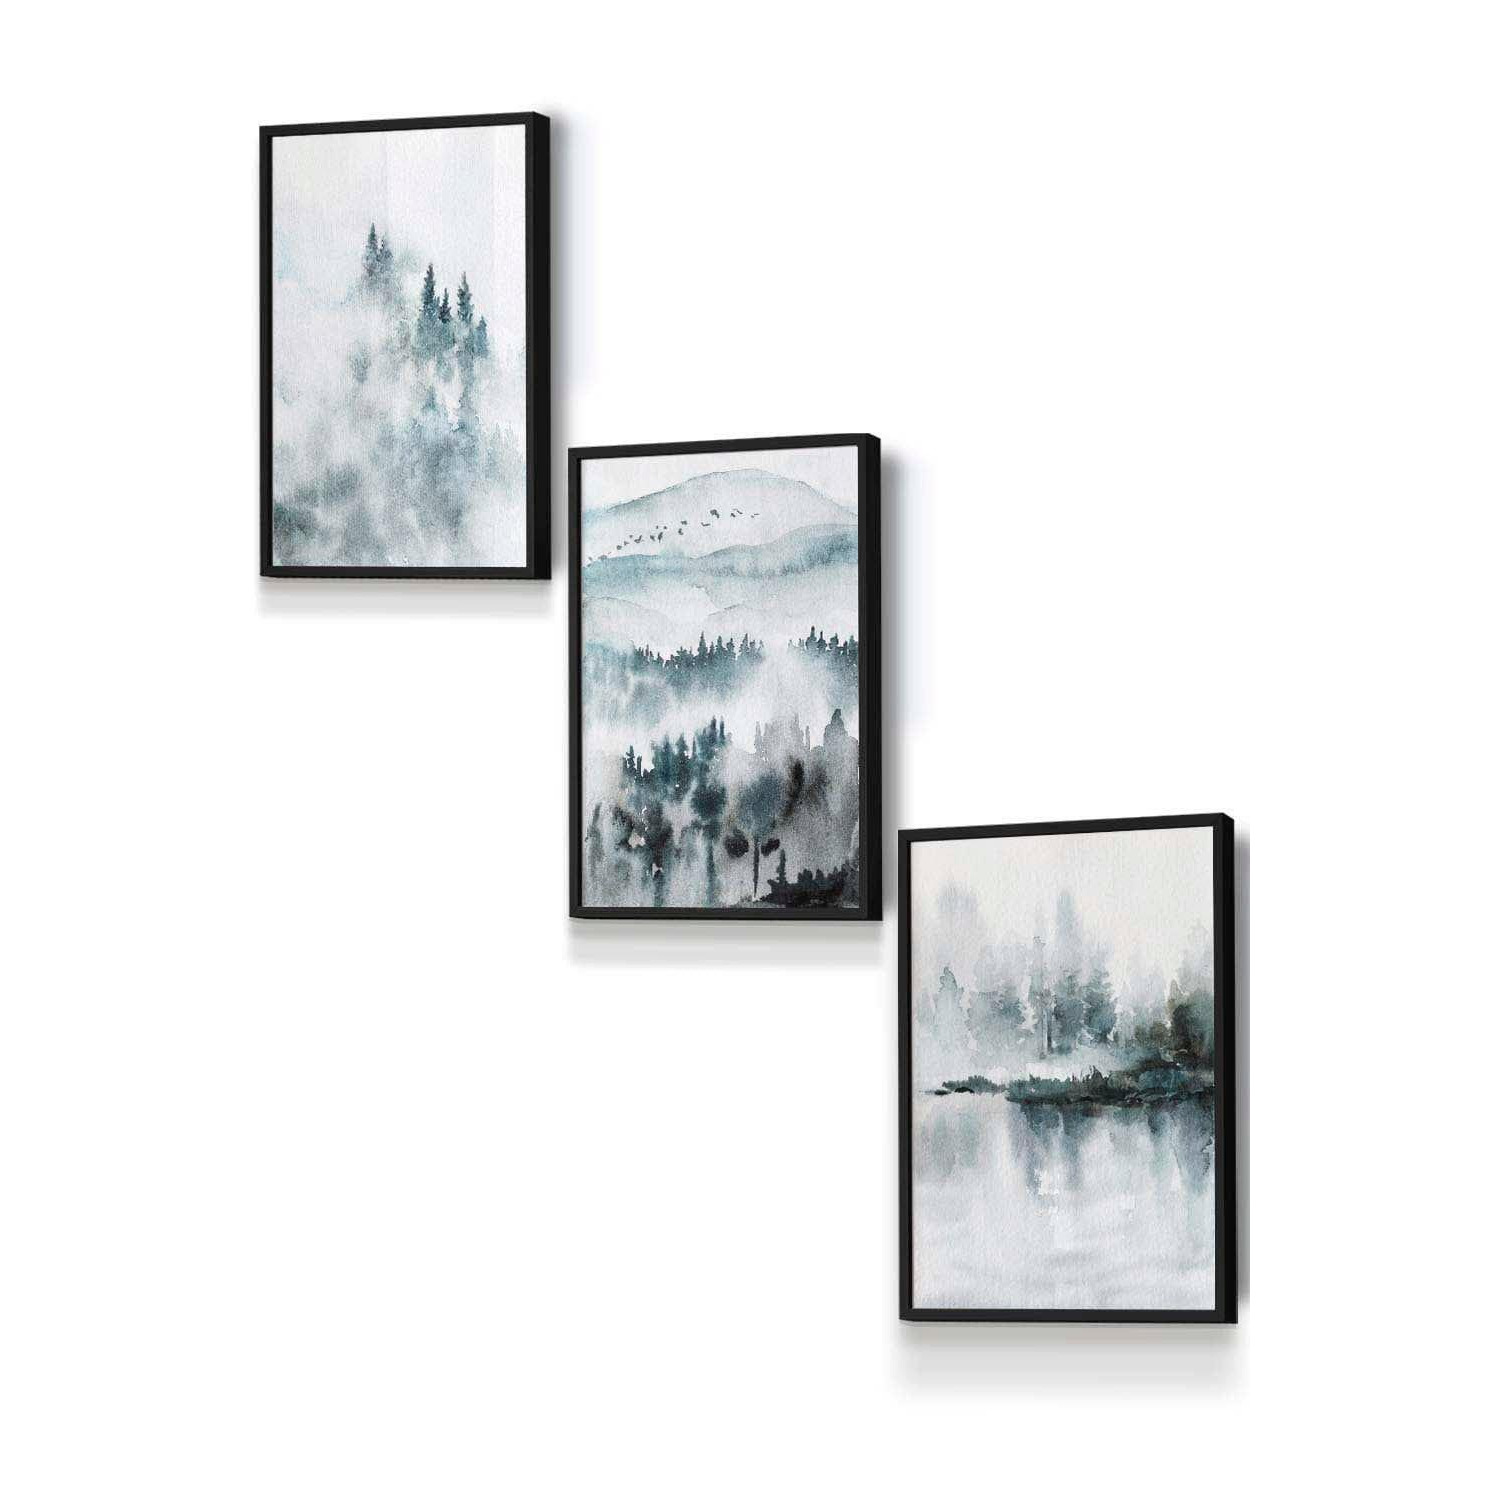 Set of 3 Black Framed Teal Blue Abstract Forest Lake Wall Art - image 1